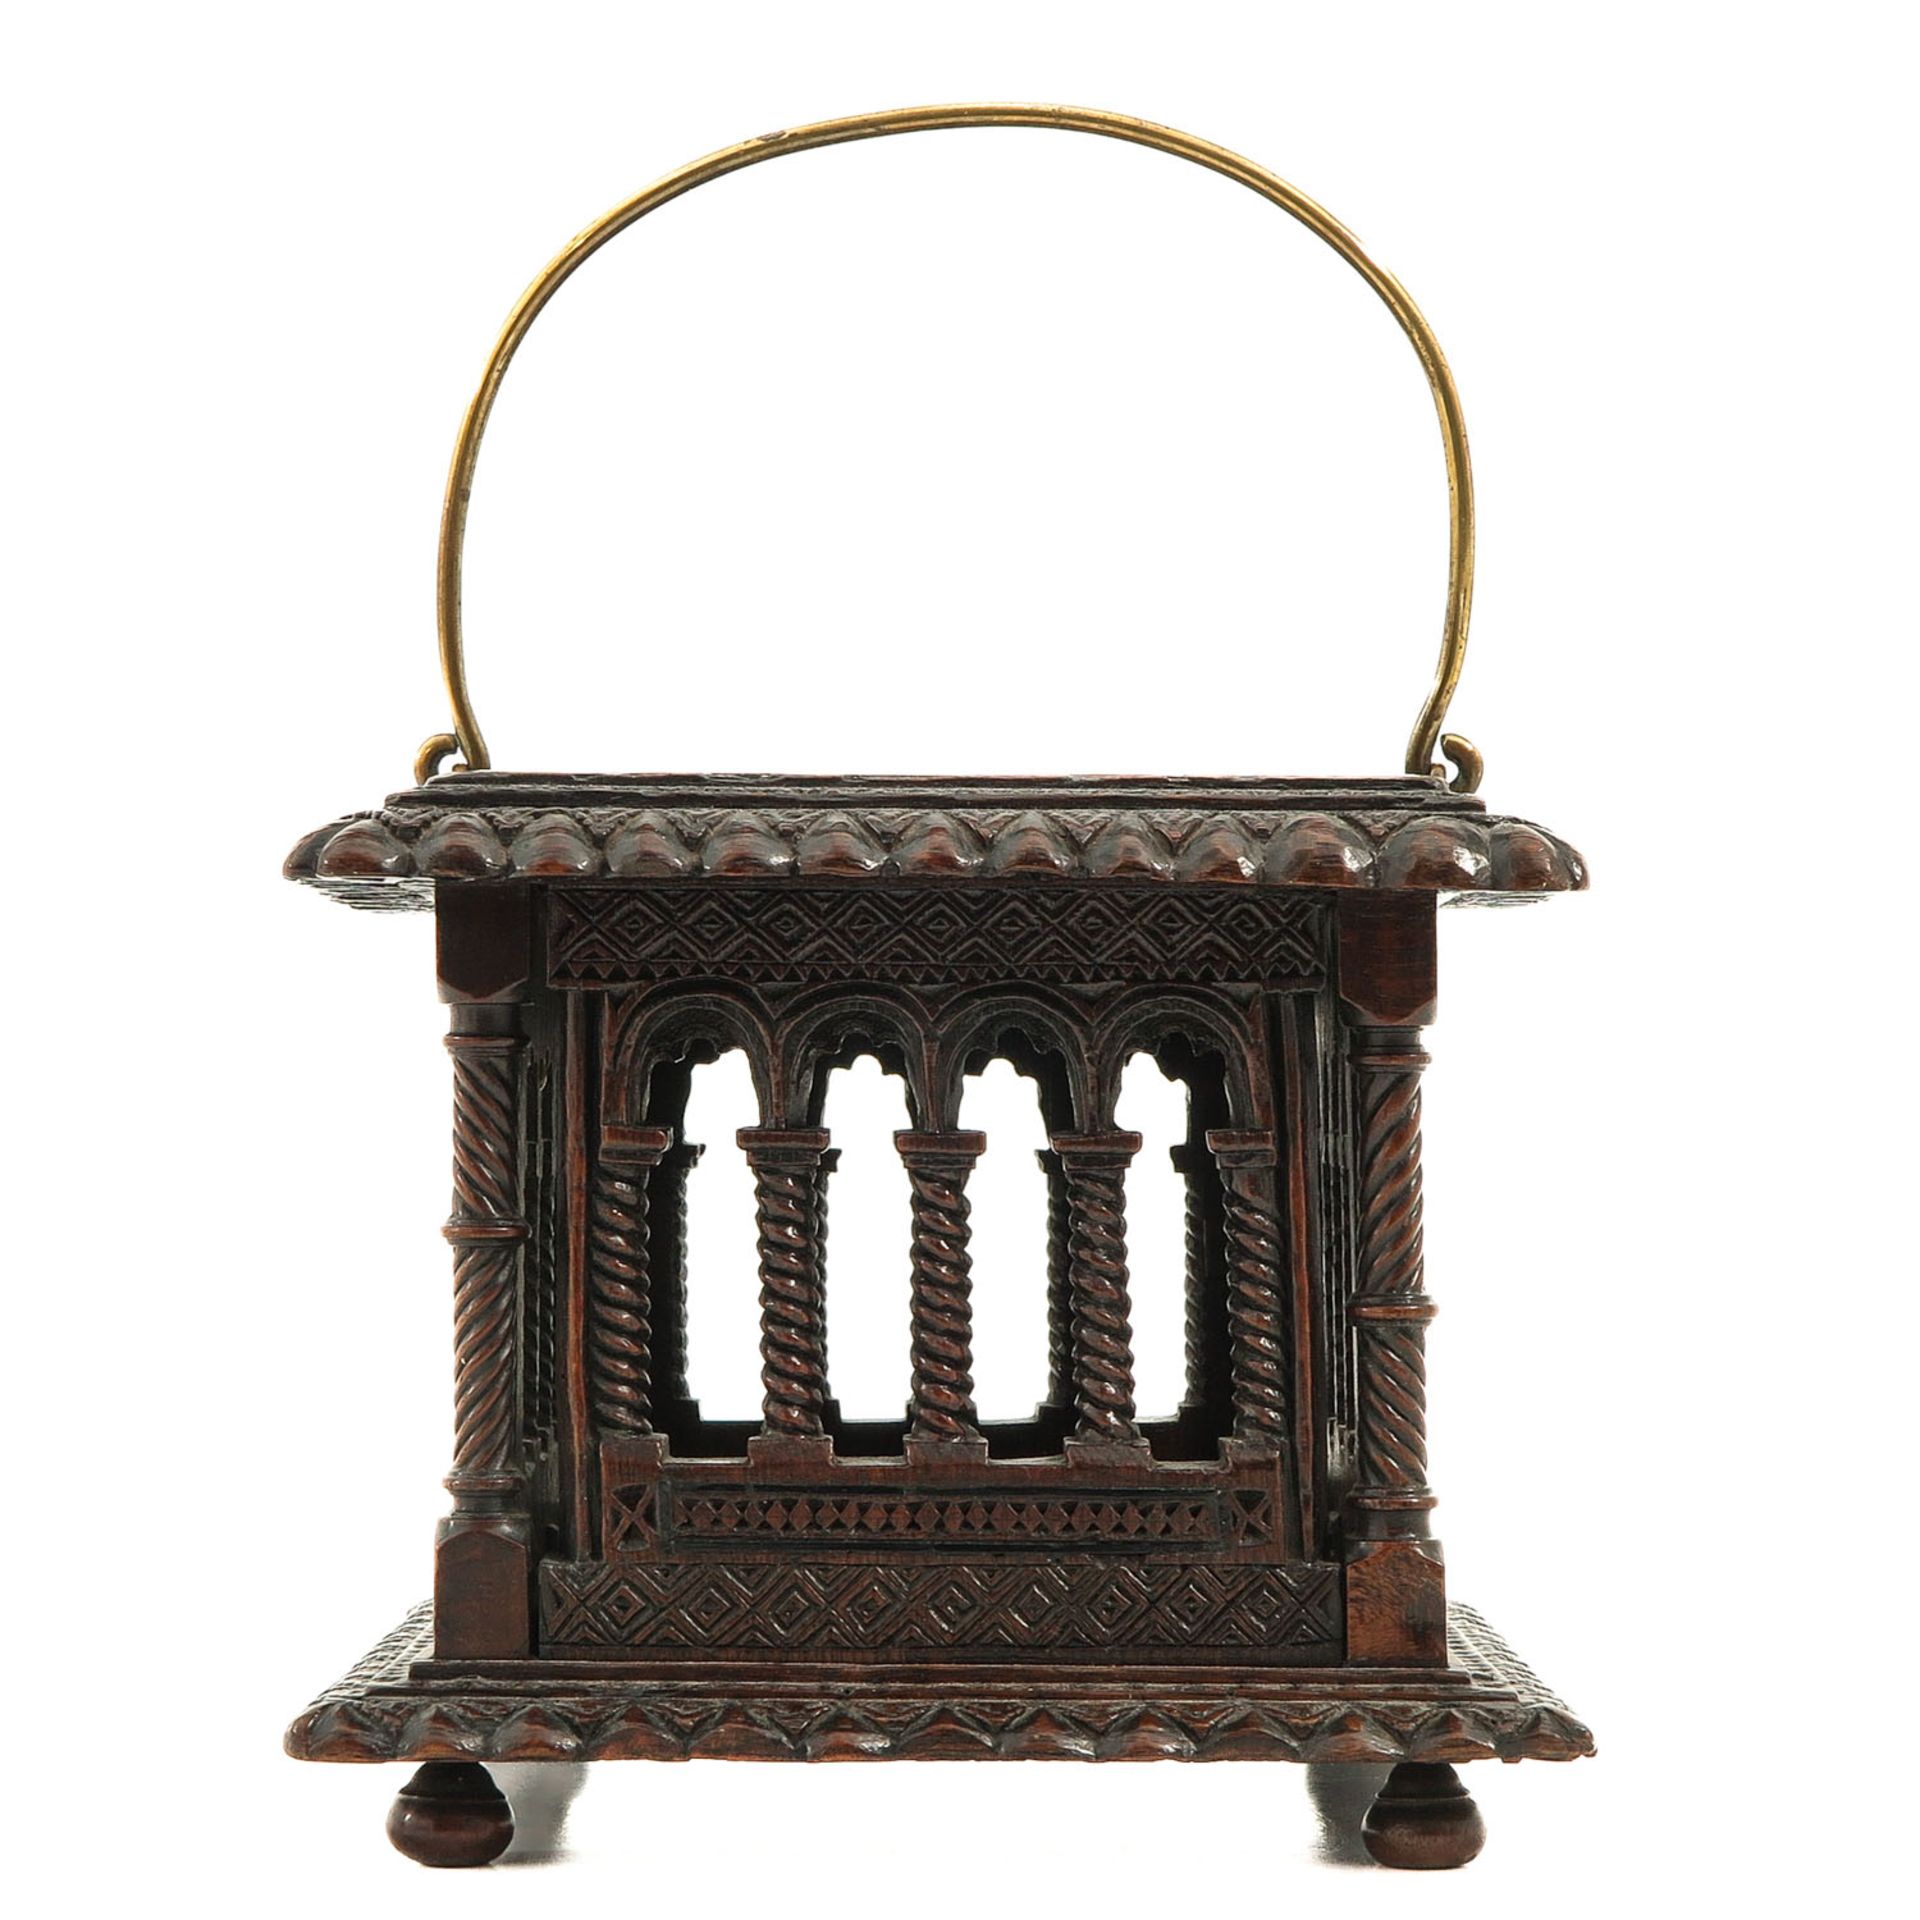 A Carved Wood Stove - Image 3 of 9